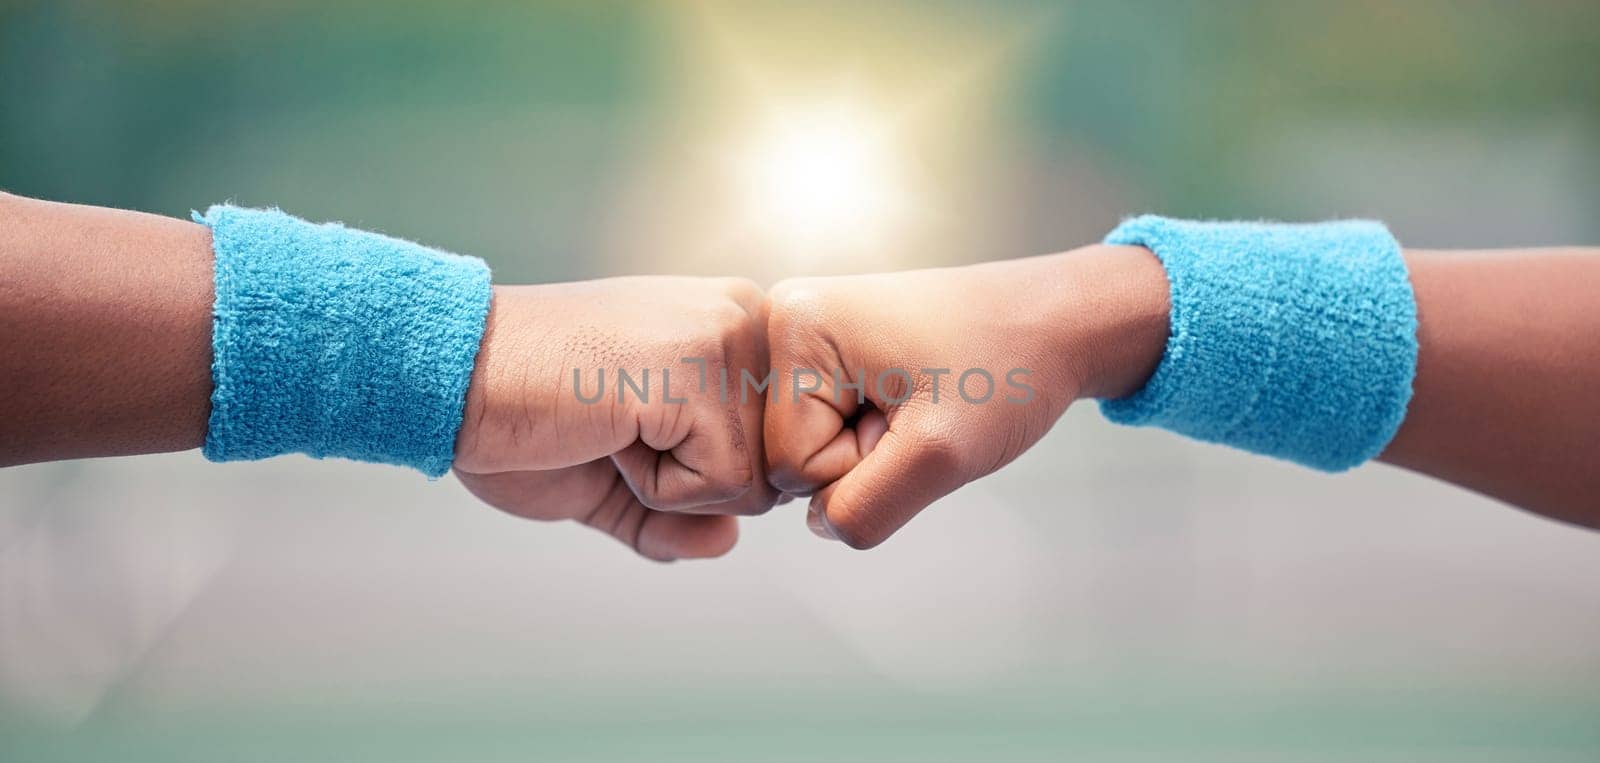 Tennis, closeup and fist bump for success, motivation and teamwork with blurred background while outdoor. Tennis player, hands and touch for respect, team building and support at training in summer by YuriArcurs